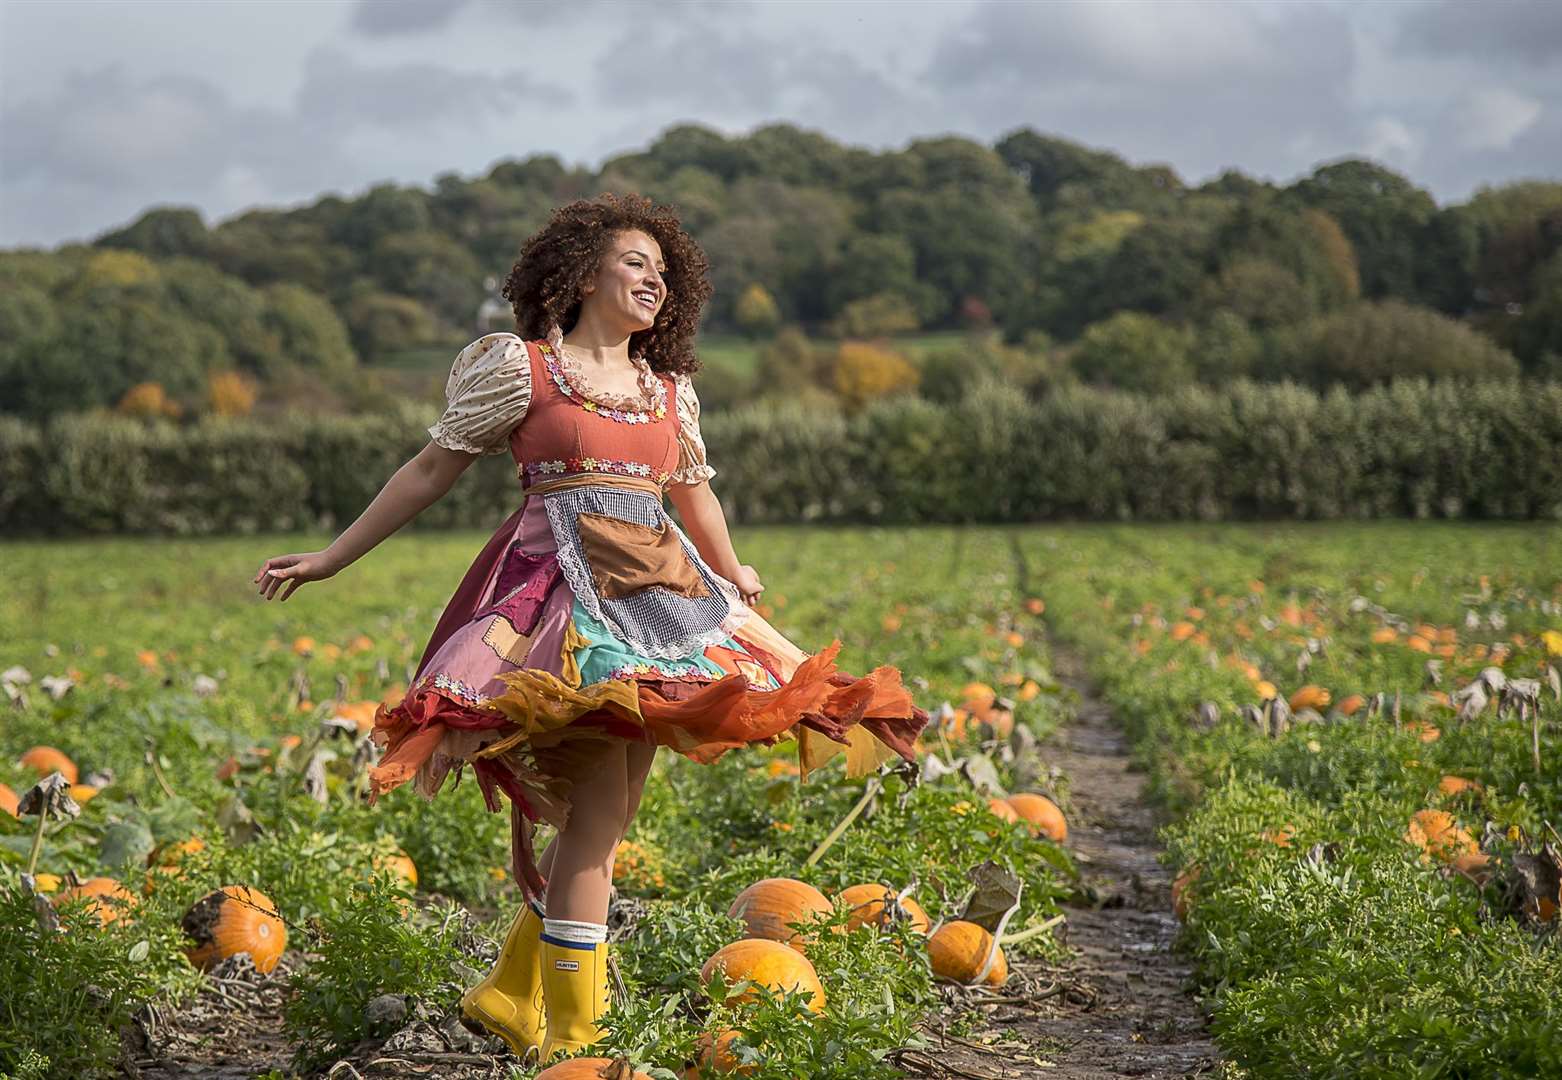 Will the Orchard Theatre's Cinderella make it back before she gets turned into a pumpkin? Picture: Orchard Theatre